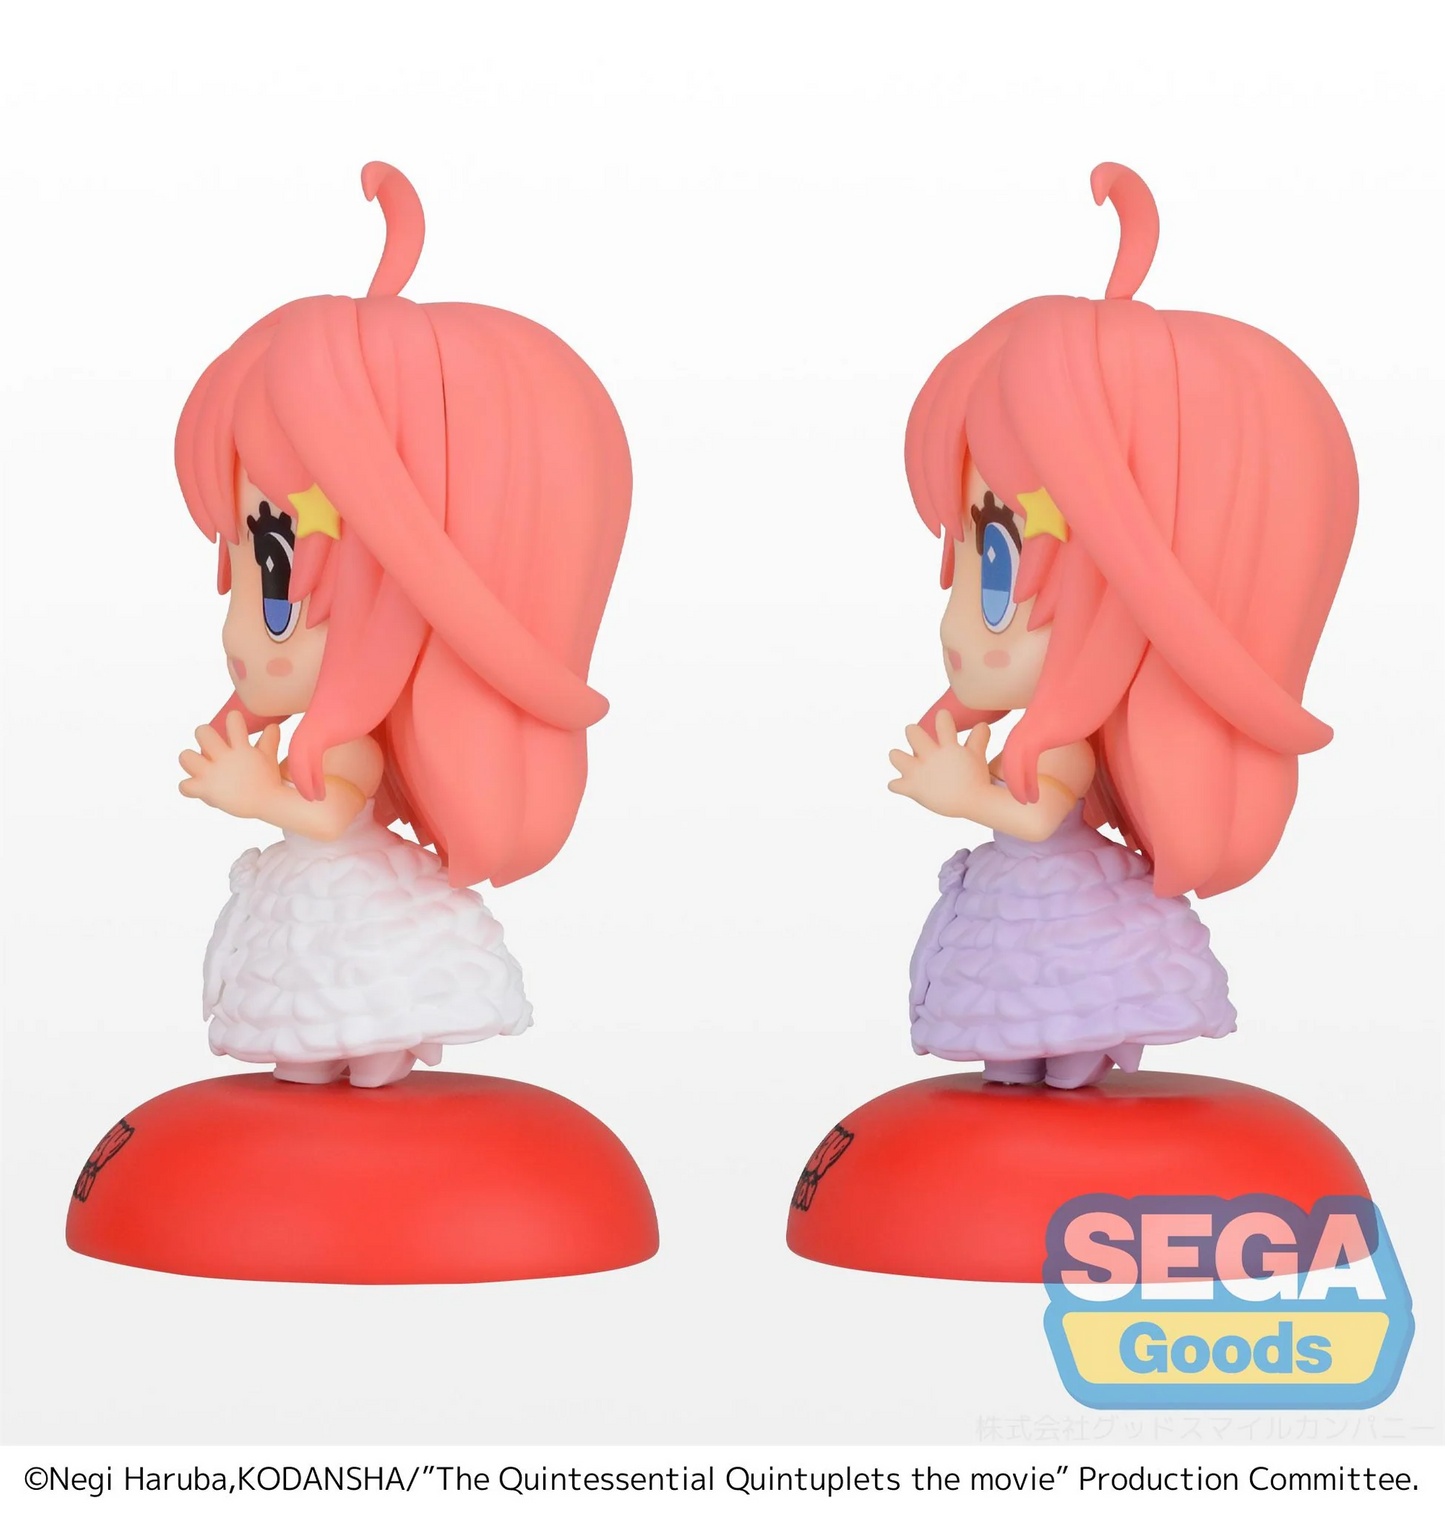 The Quintessential Quintuplets Movie - Itsuki Nakano Chubby Collection Figure